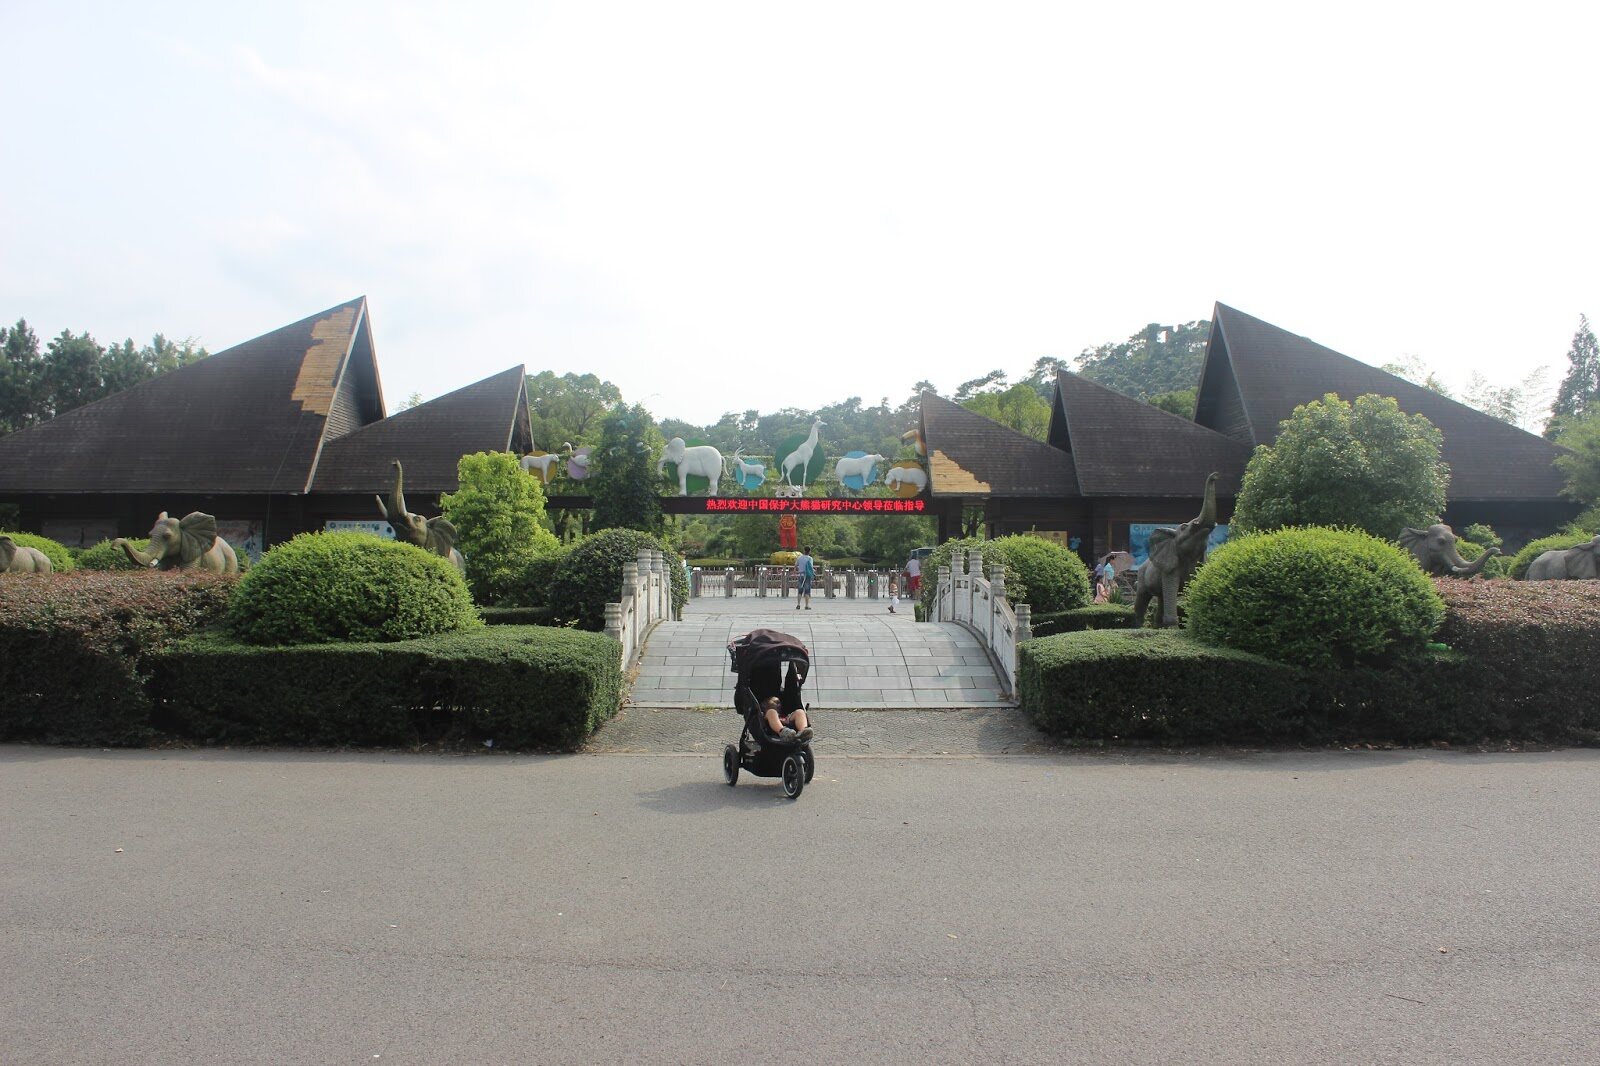 16-astounding-facts-about-ningbo-youngor-zoo